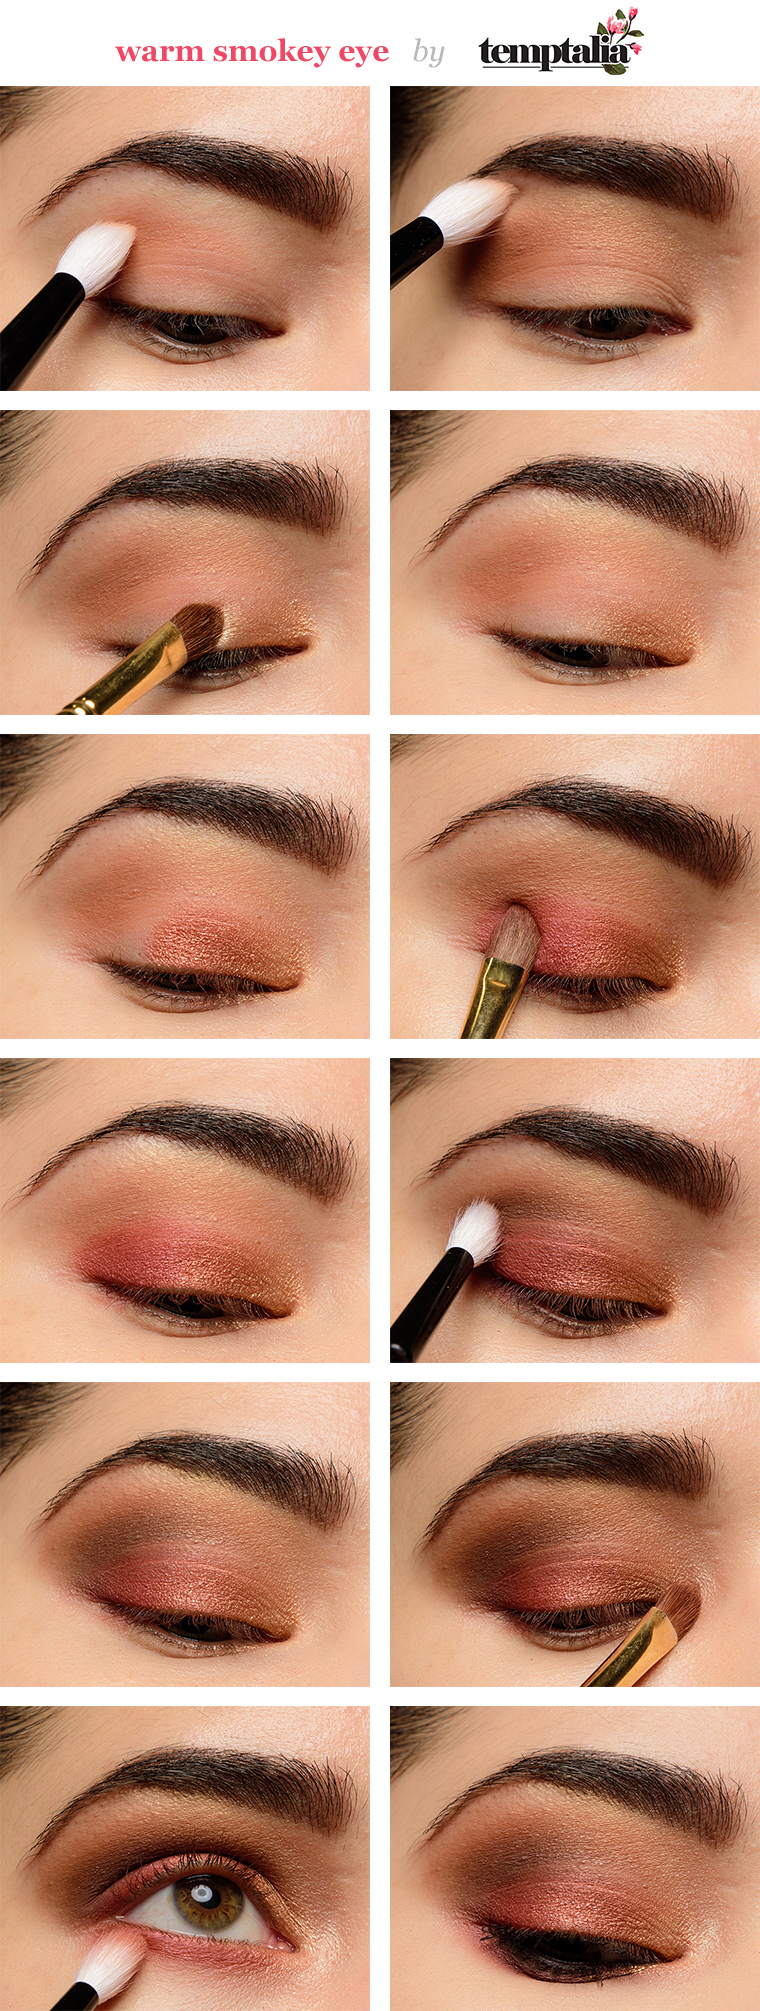 Eye Makeup Step By Step Instructions With Pictures How To Apply Eyeshadow Smokey Eye Makeup Tutorial For Beginners